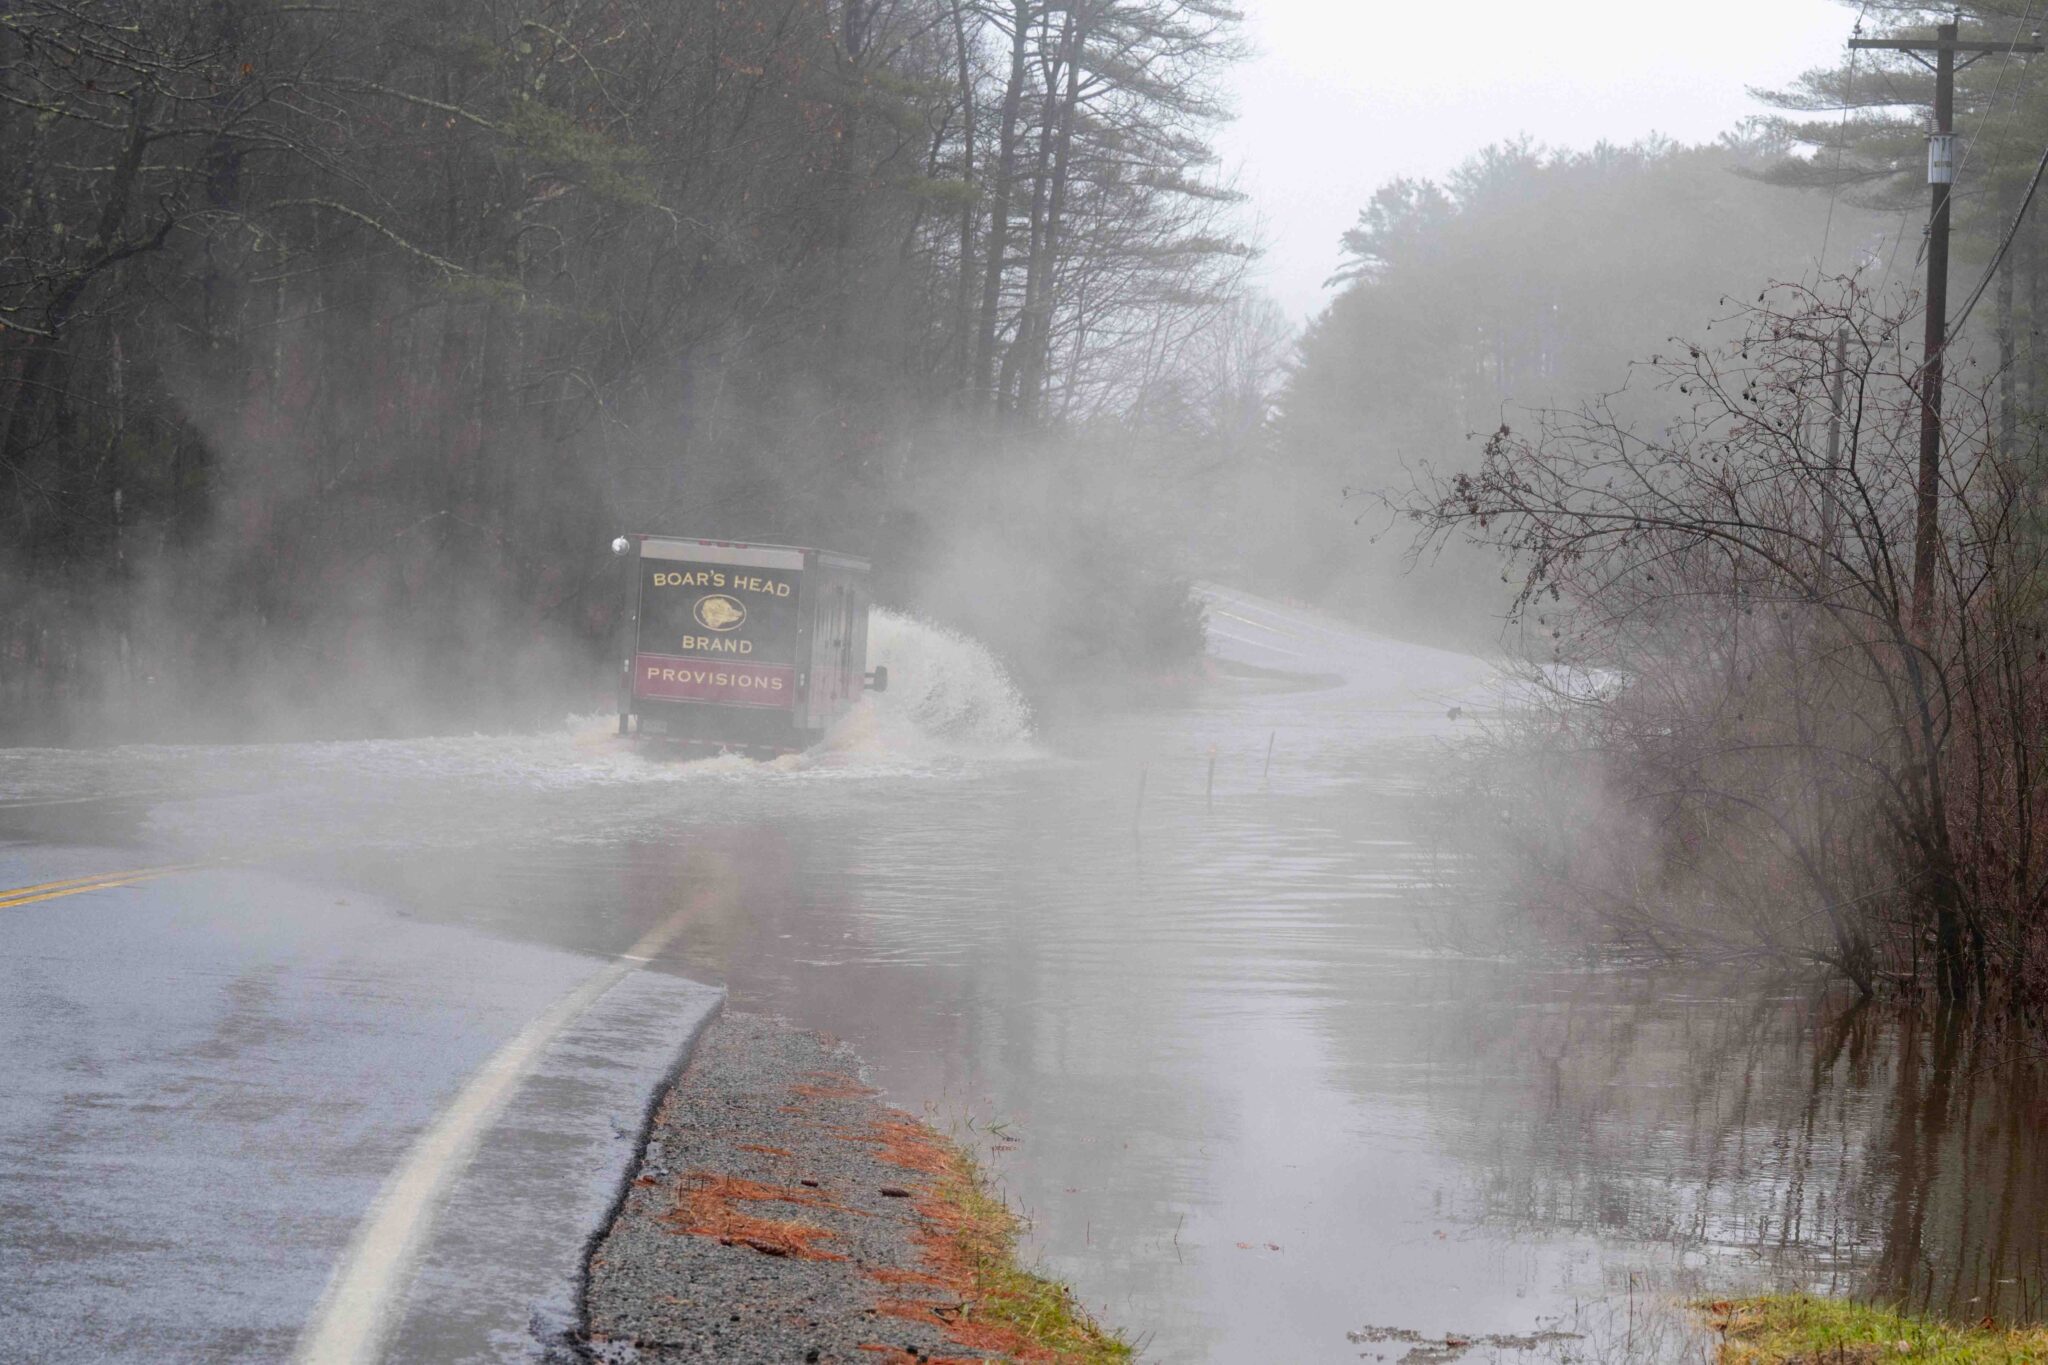 a truck drives through water flooding a road. Recent rains causing road closures